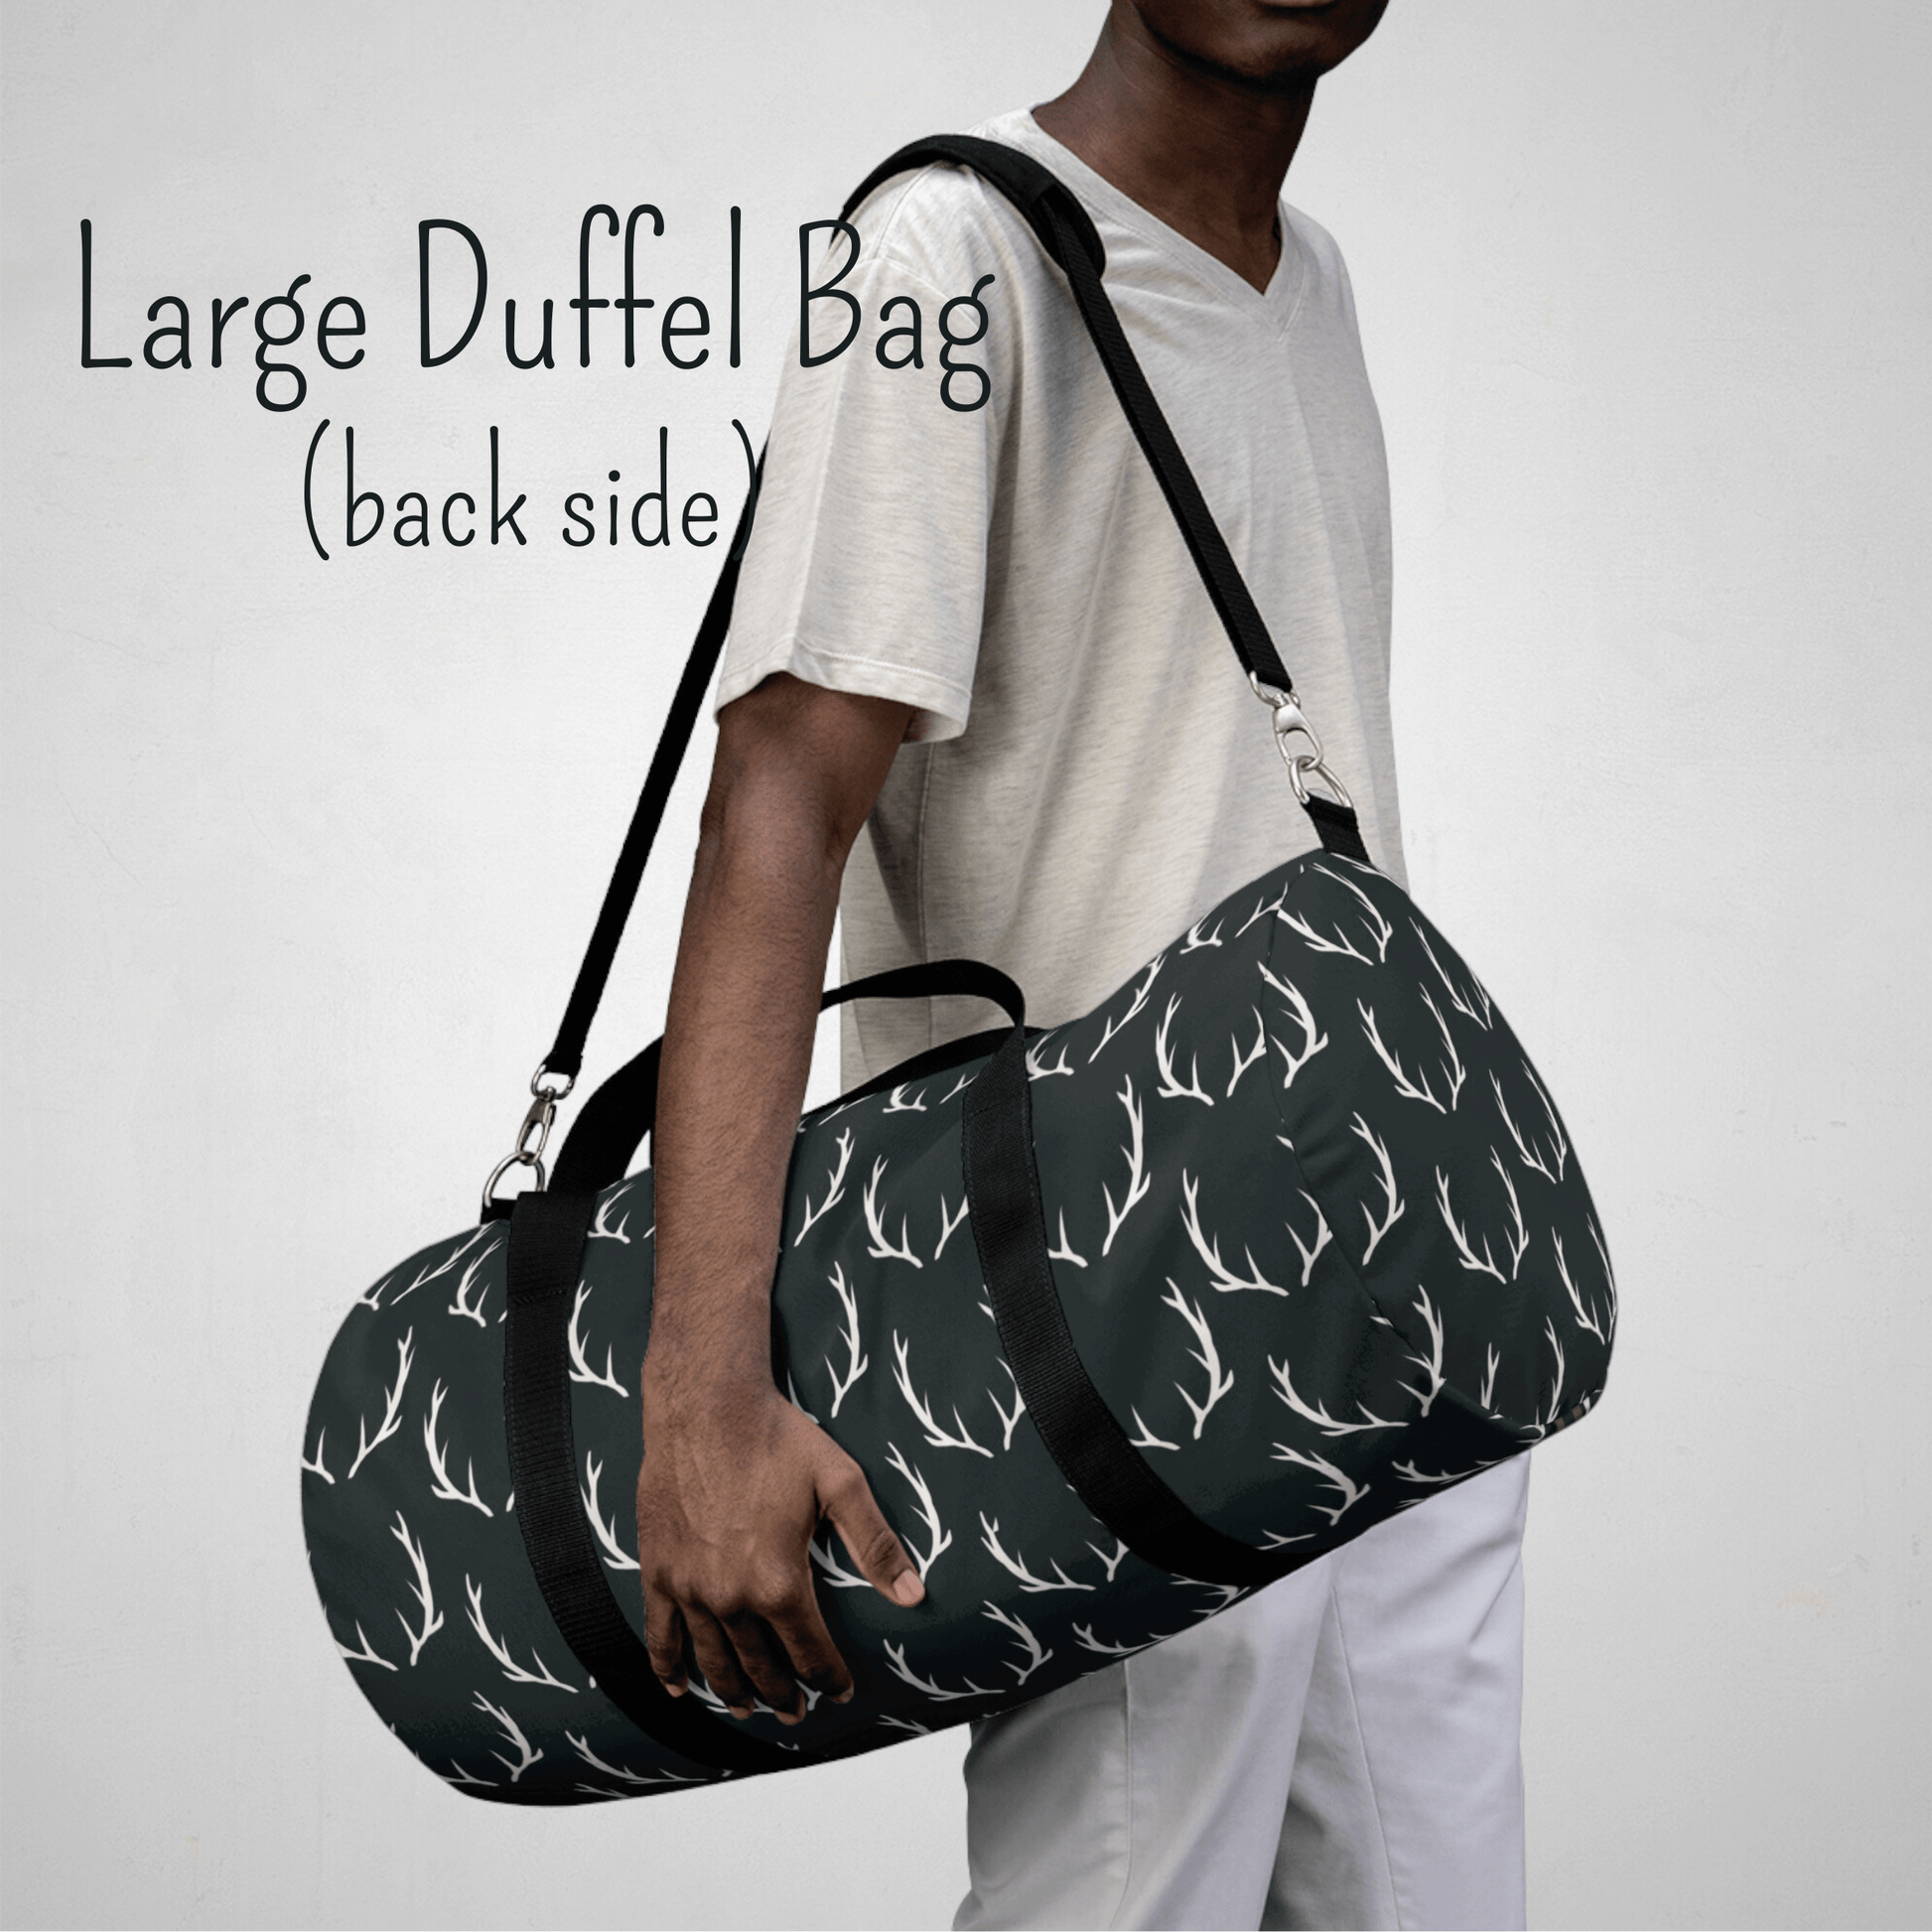 Our large duffel bag with deer antlers is shown on a model. This bag can be carried over the shoulder with the padded strap or with the black carrying handles. This bag is large size.